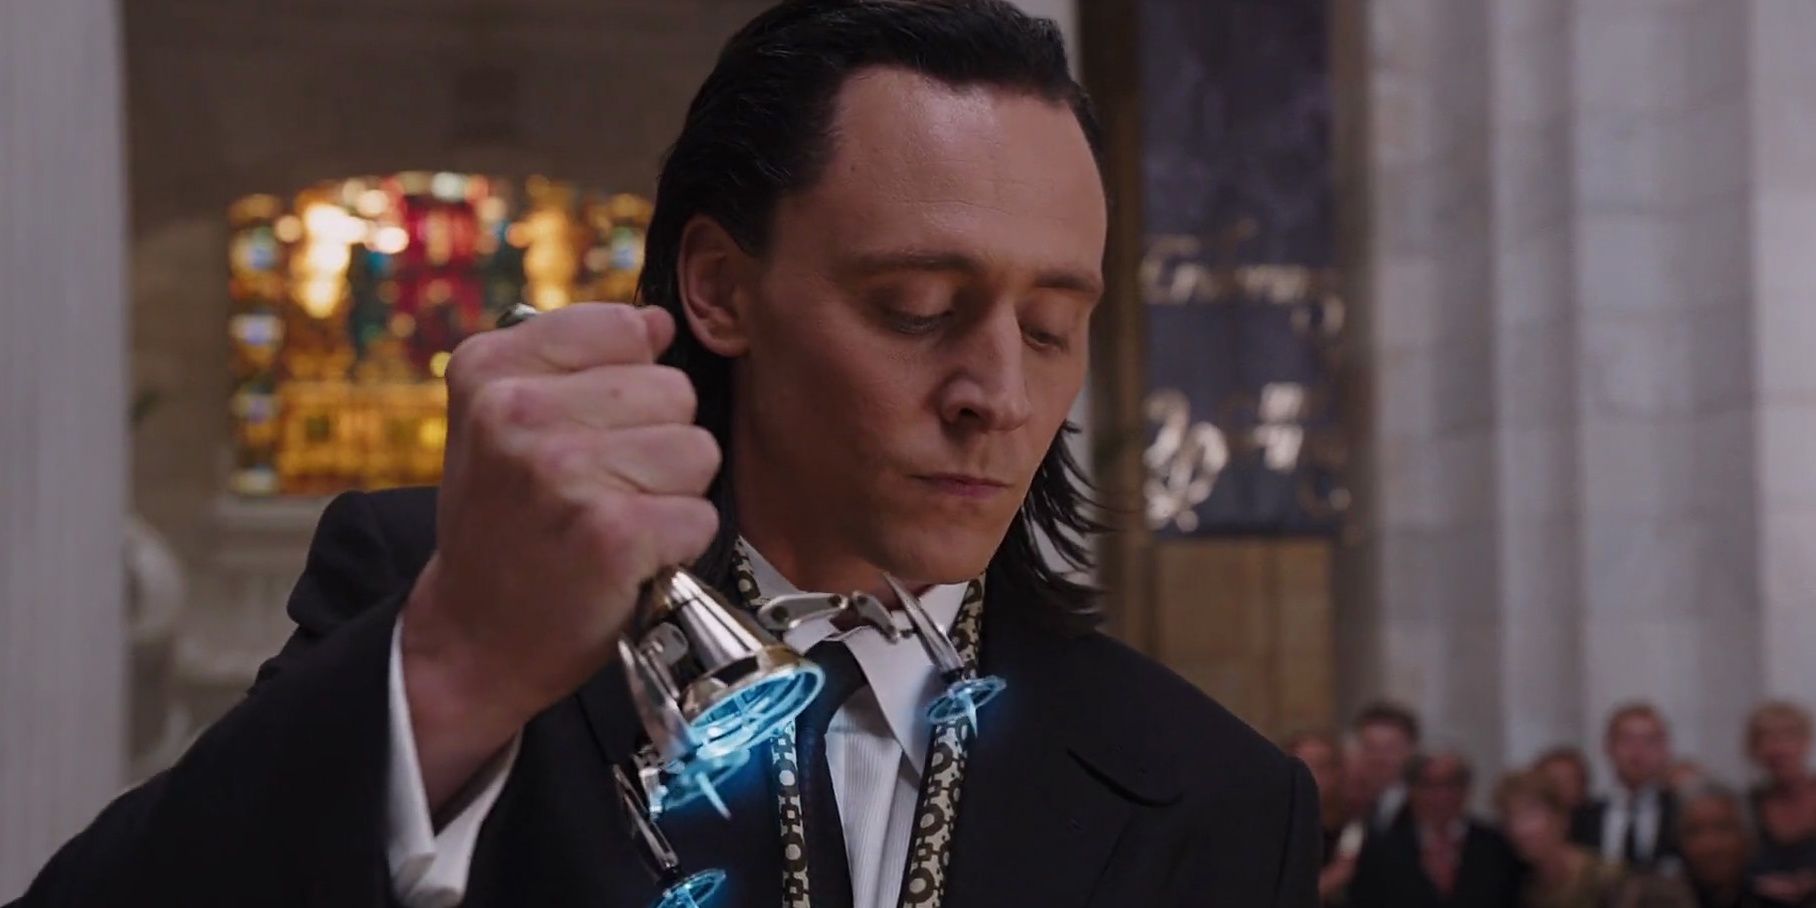 Loki takes the eyeball off of a man in The Avengers